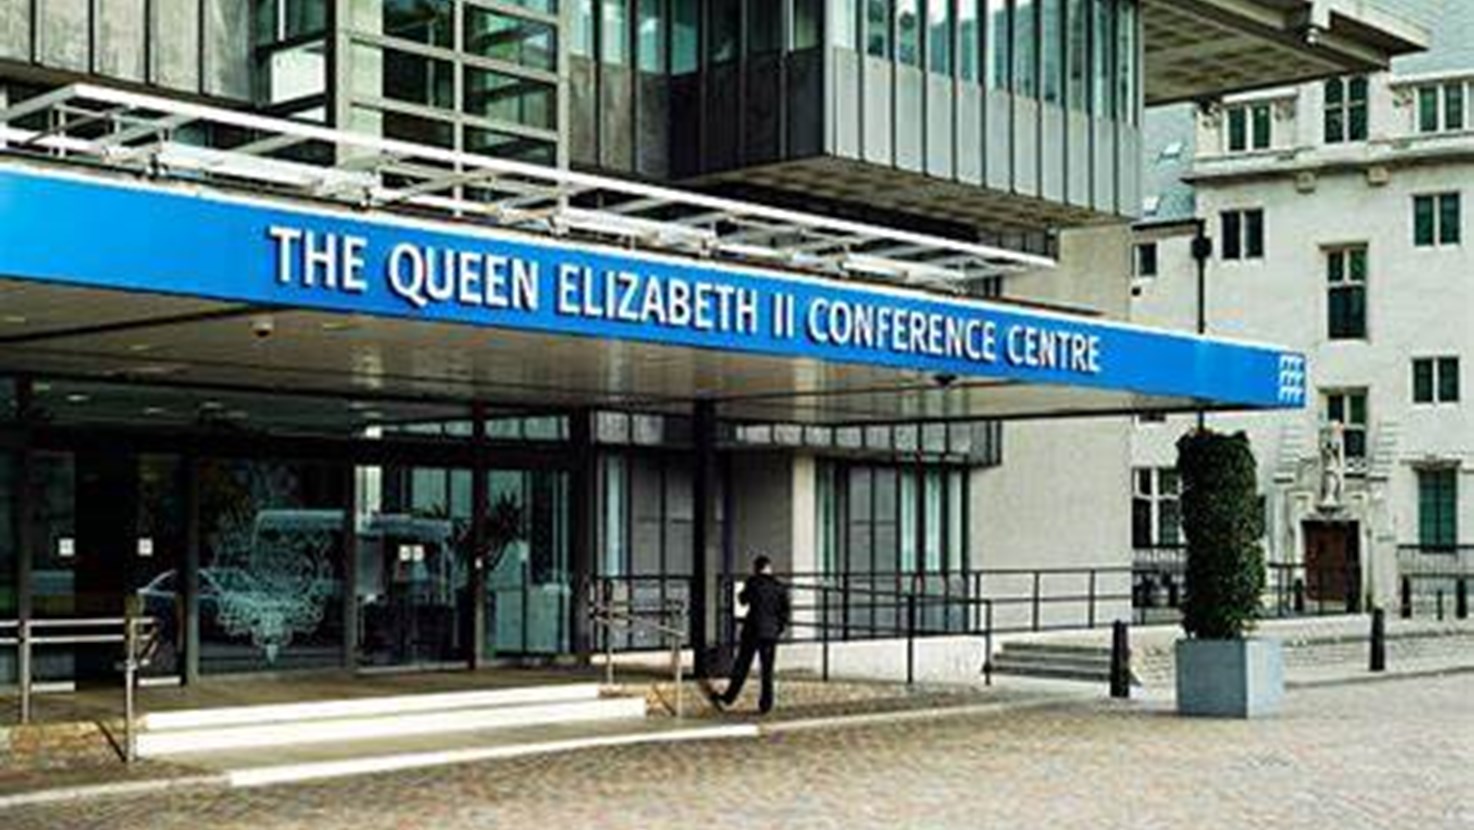 View all of the events and meetings that PCC Marc Jones attended or hosted at the QEII Conference Centre in 2022